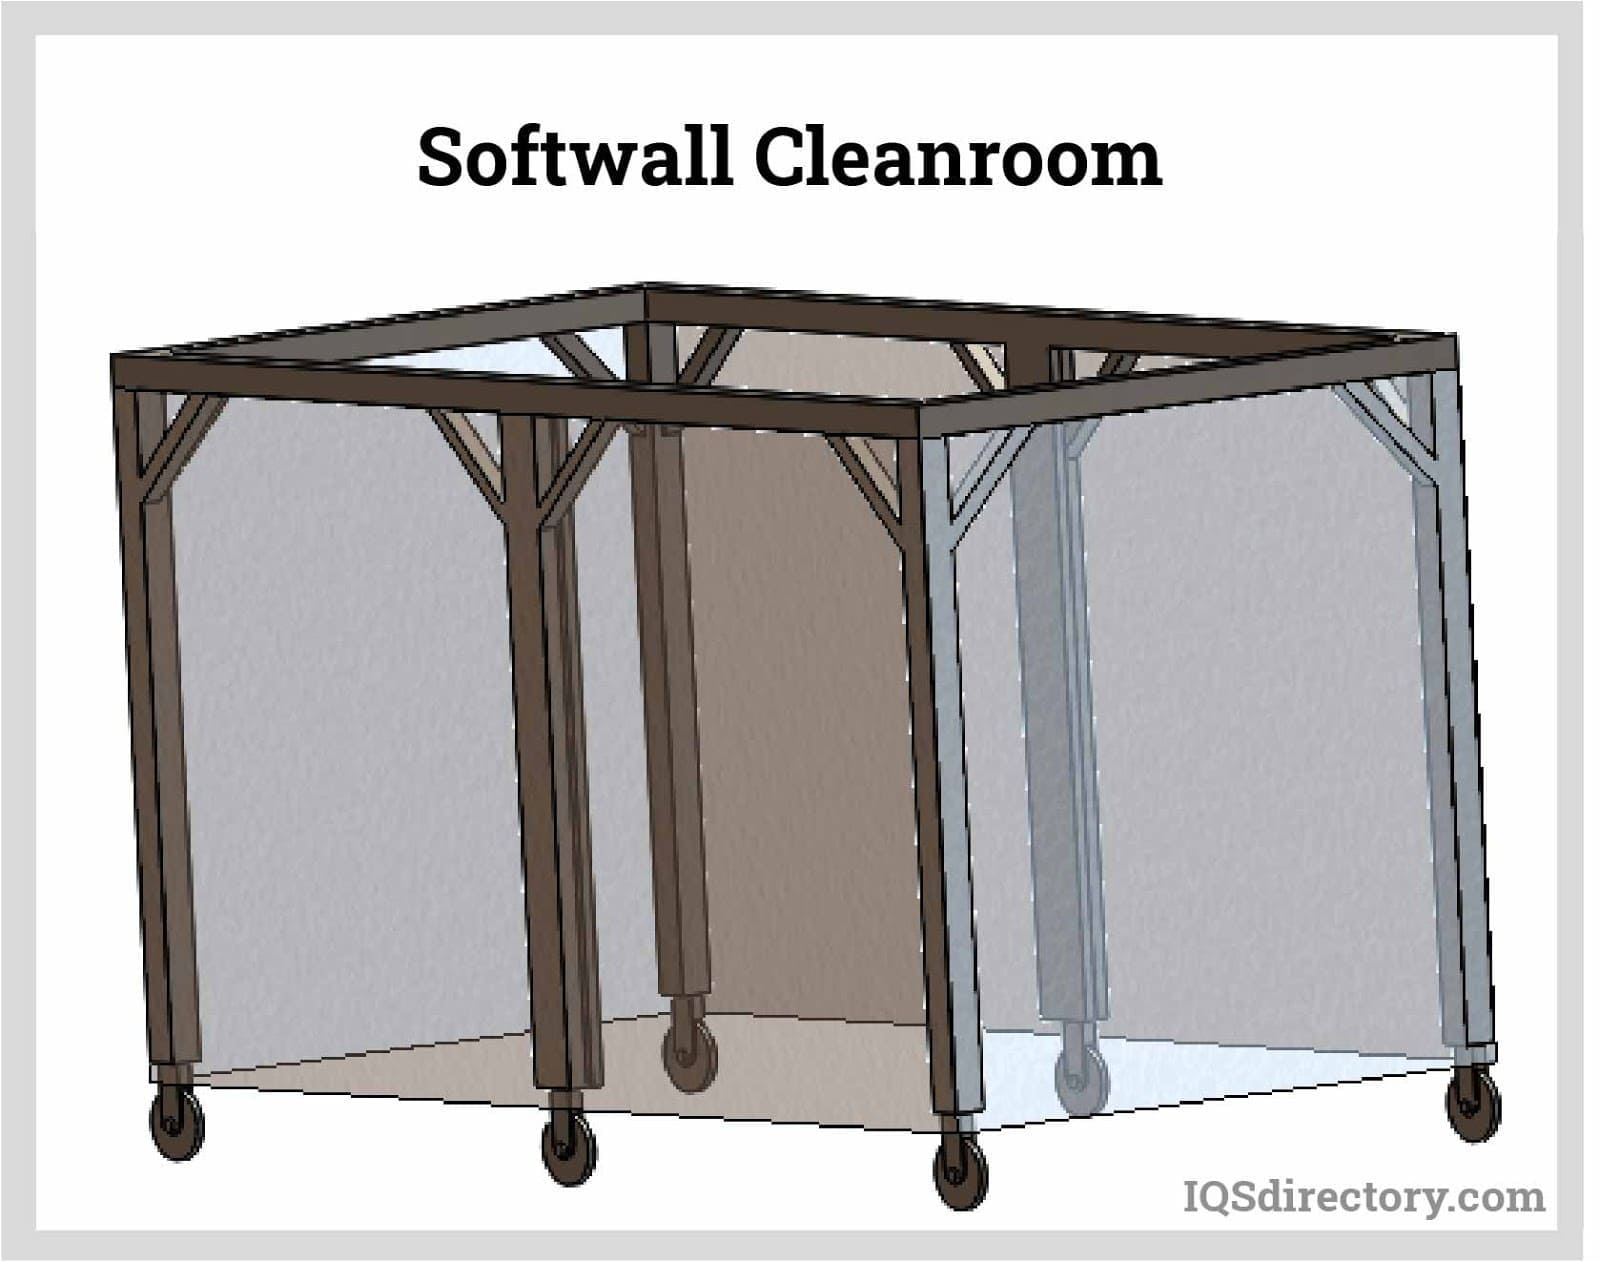 Softwall Cleanrooms